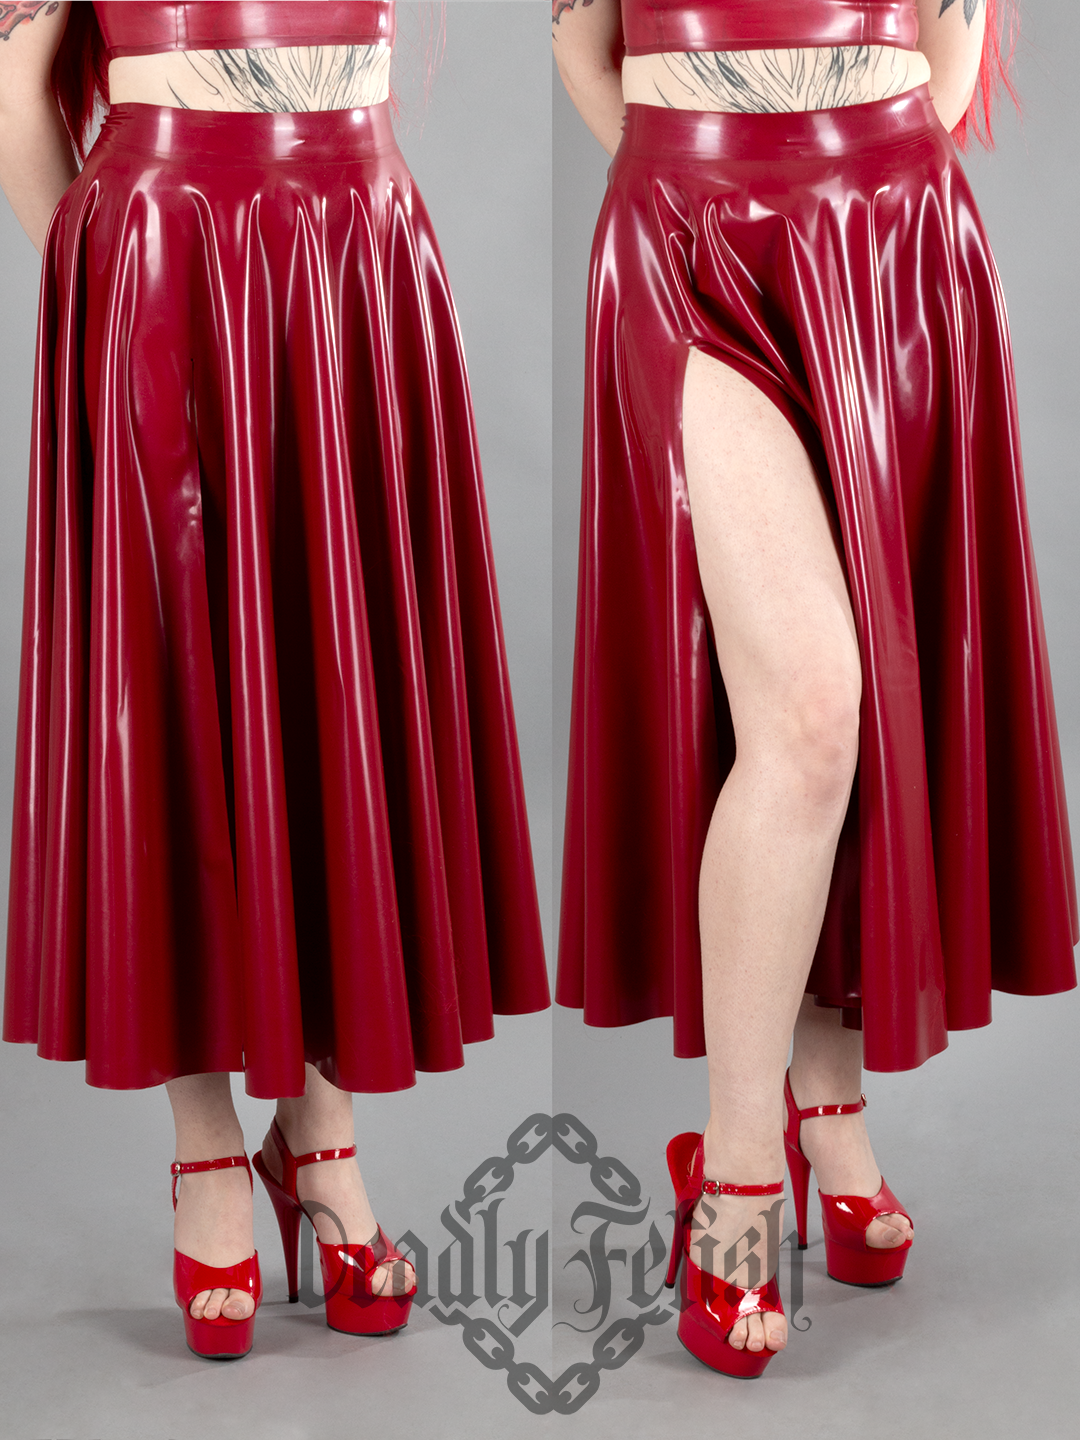 Deadly Fetish Made-To-Order Latex: Skirt #02